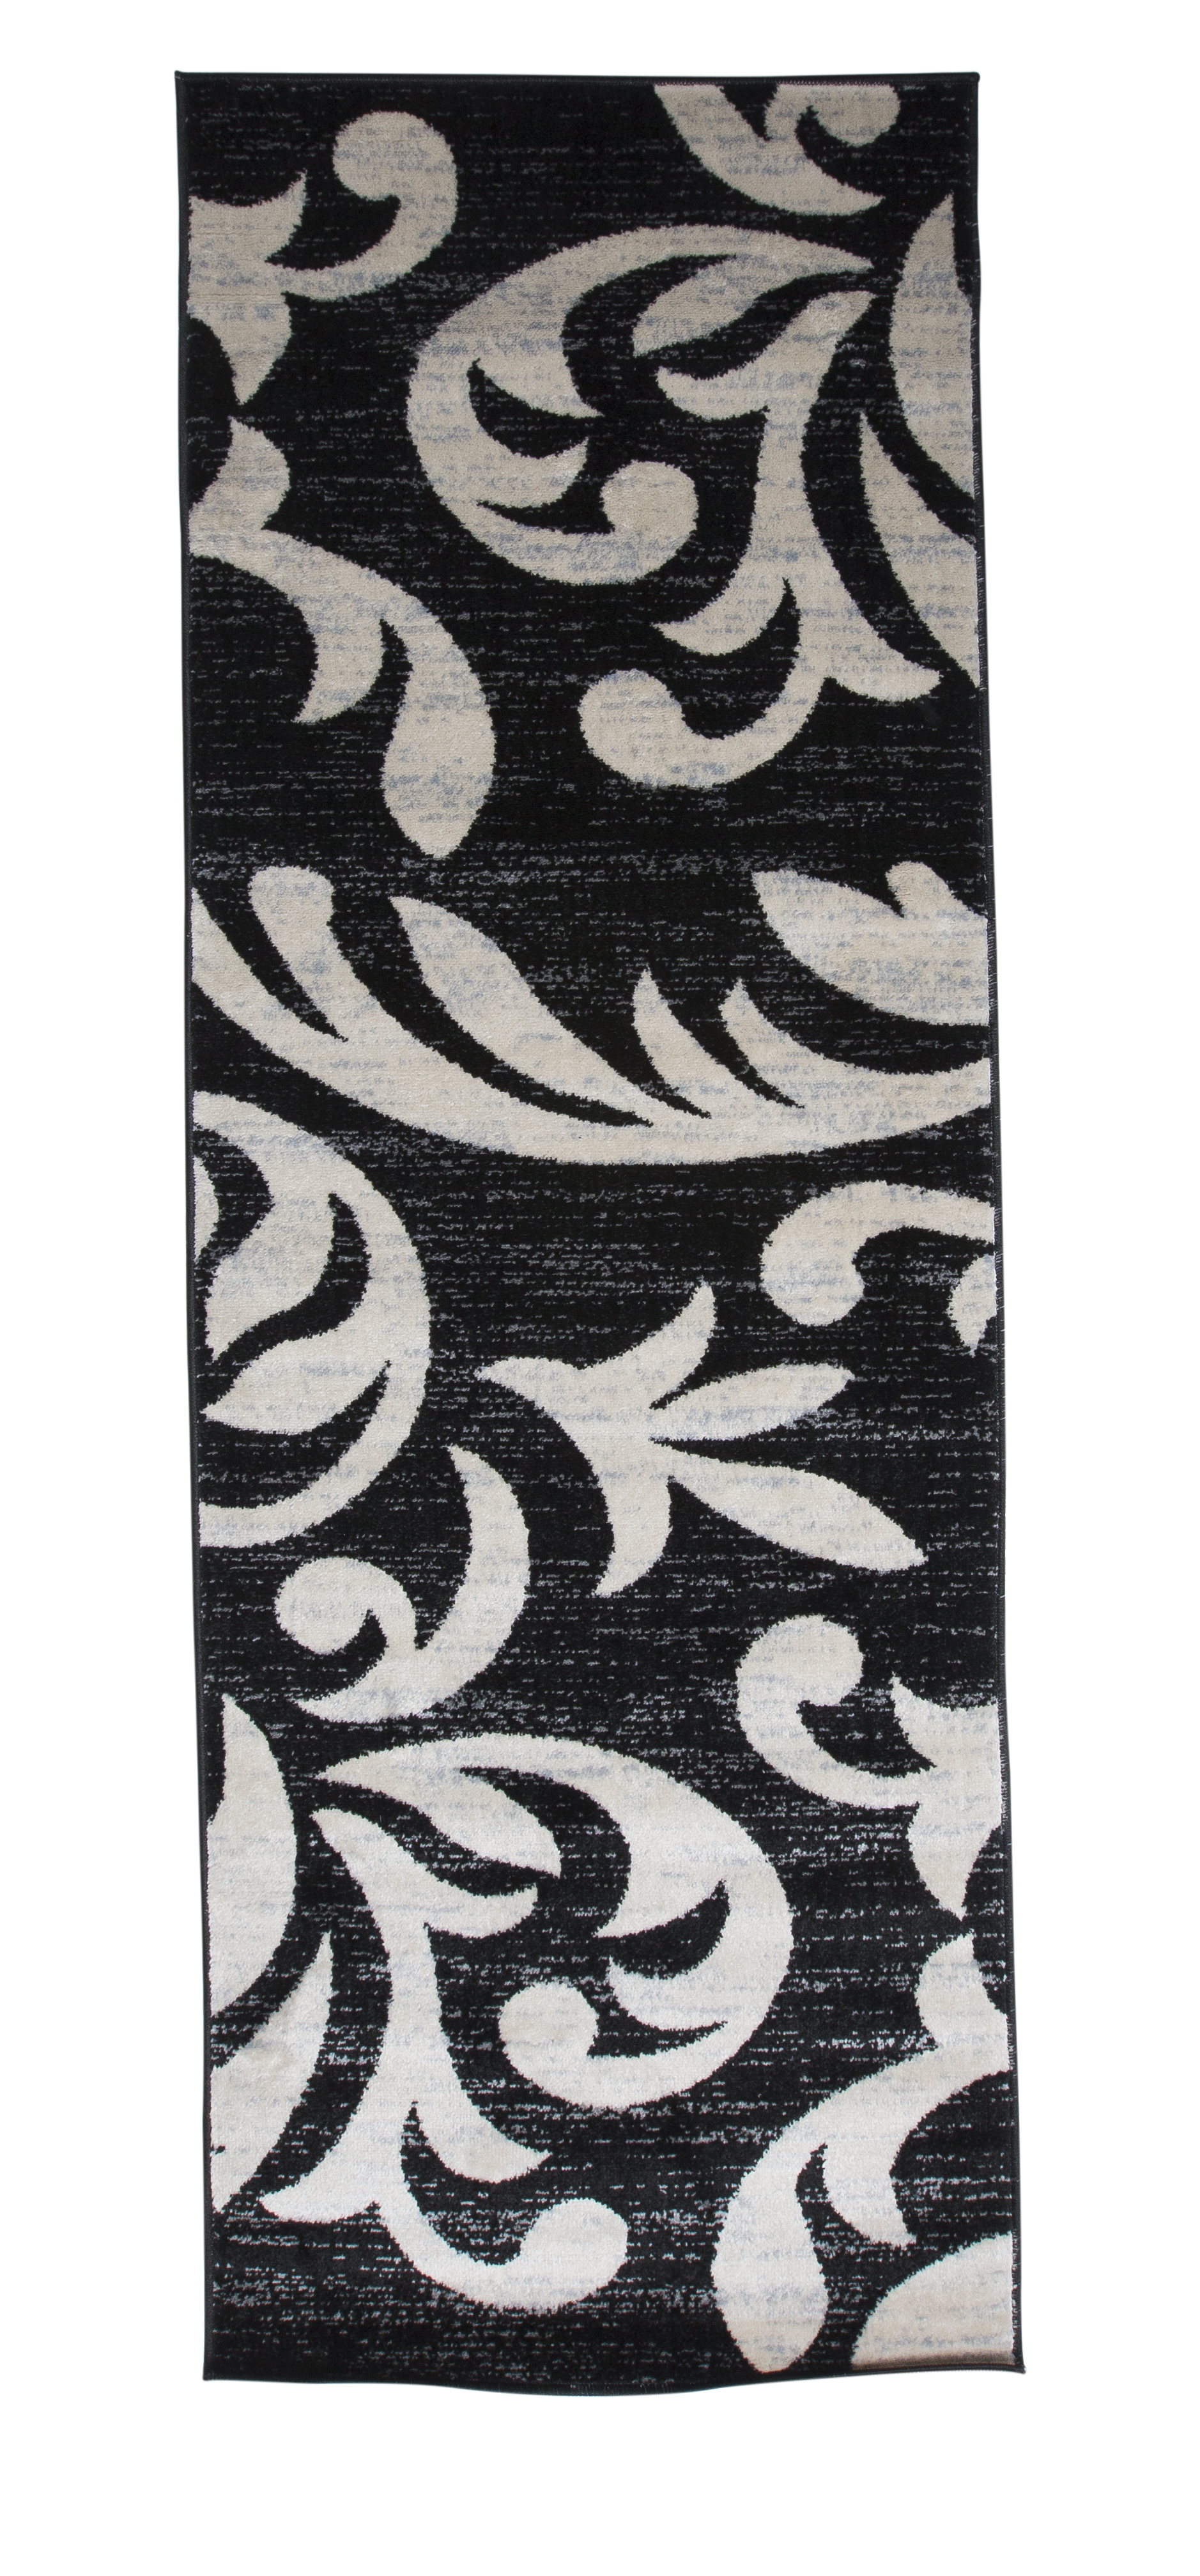 Knoxville Area Rug F 7510 - Context USA - Area Rug by MSRUGS